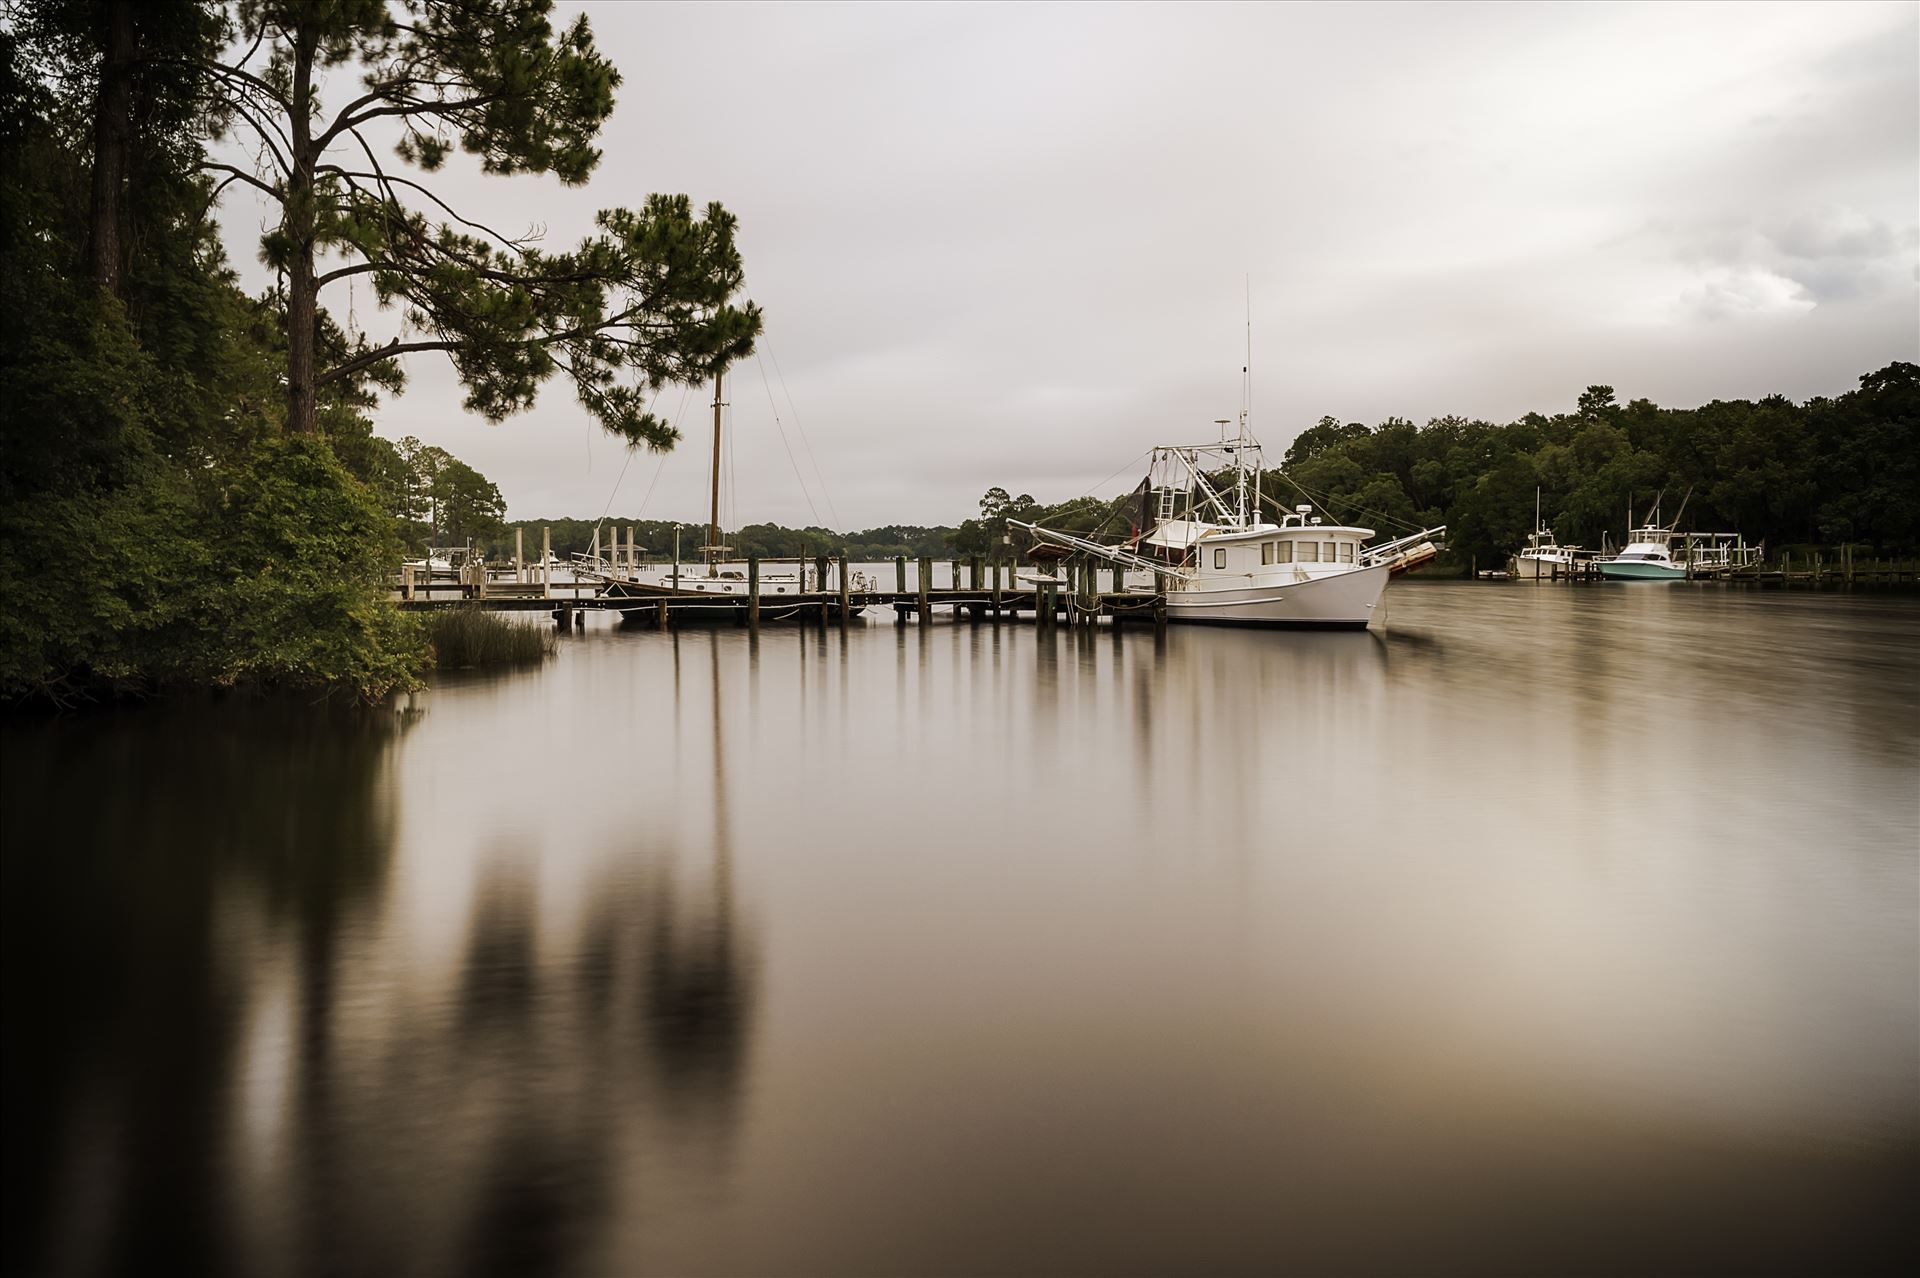 long exposure of boats in the bay 8500344.jpg Shrimp boat at dock, Southport, Florida by Terry Kelly Photography